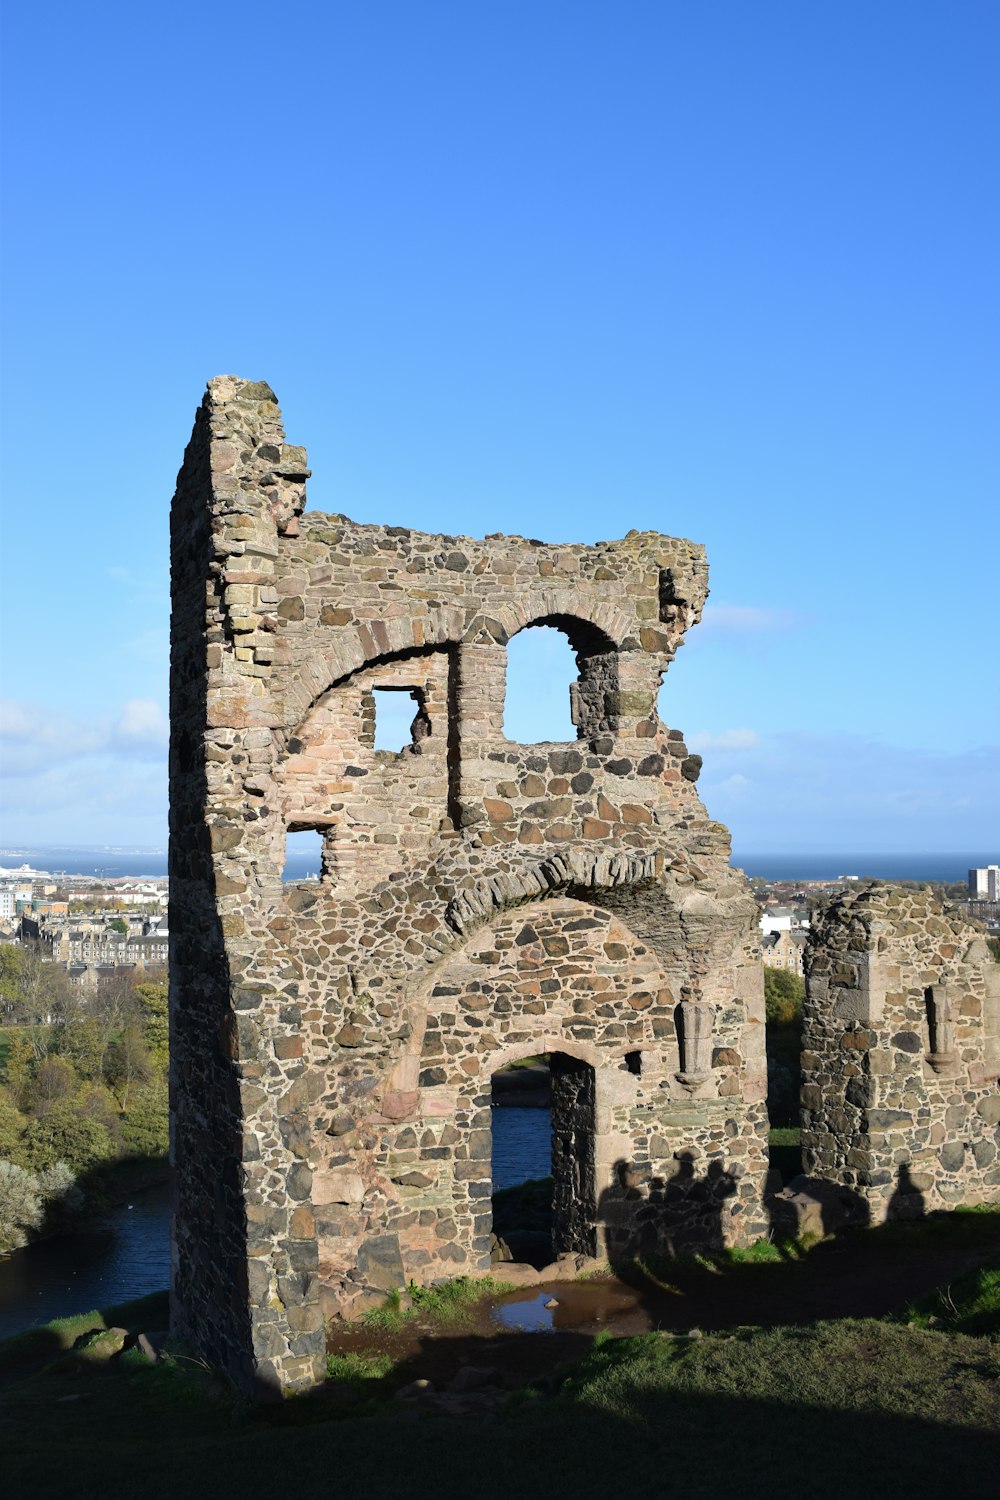 the ruins of an old castle overlooking a body of water